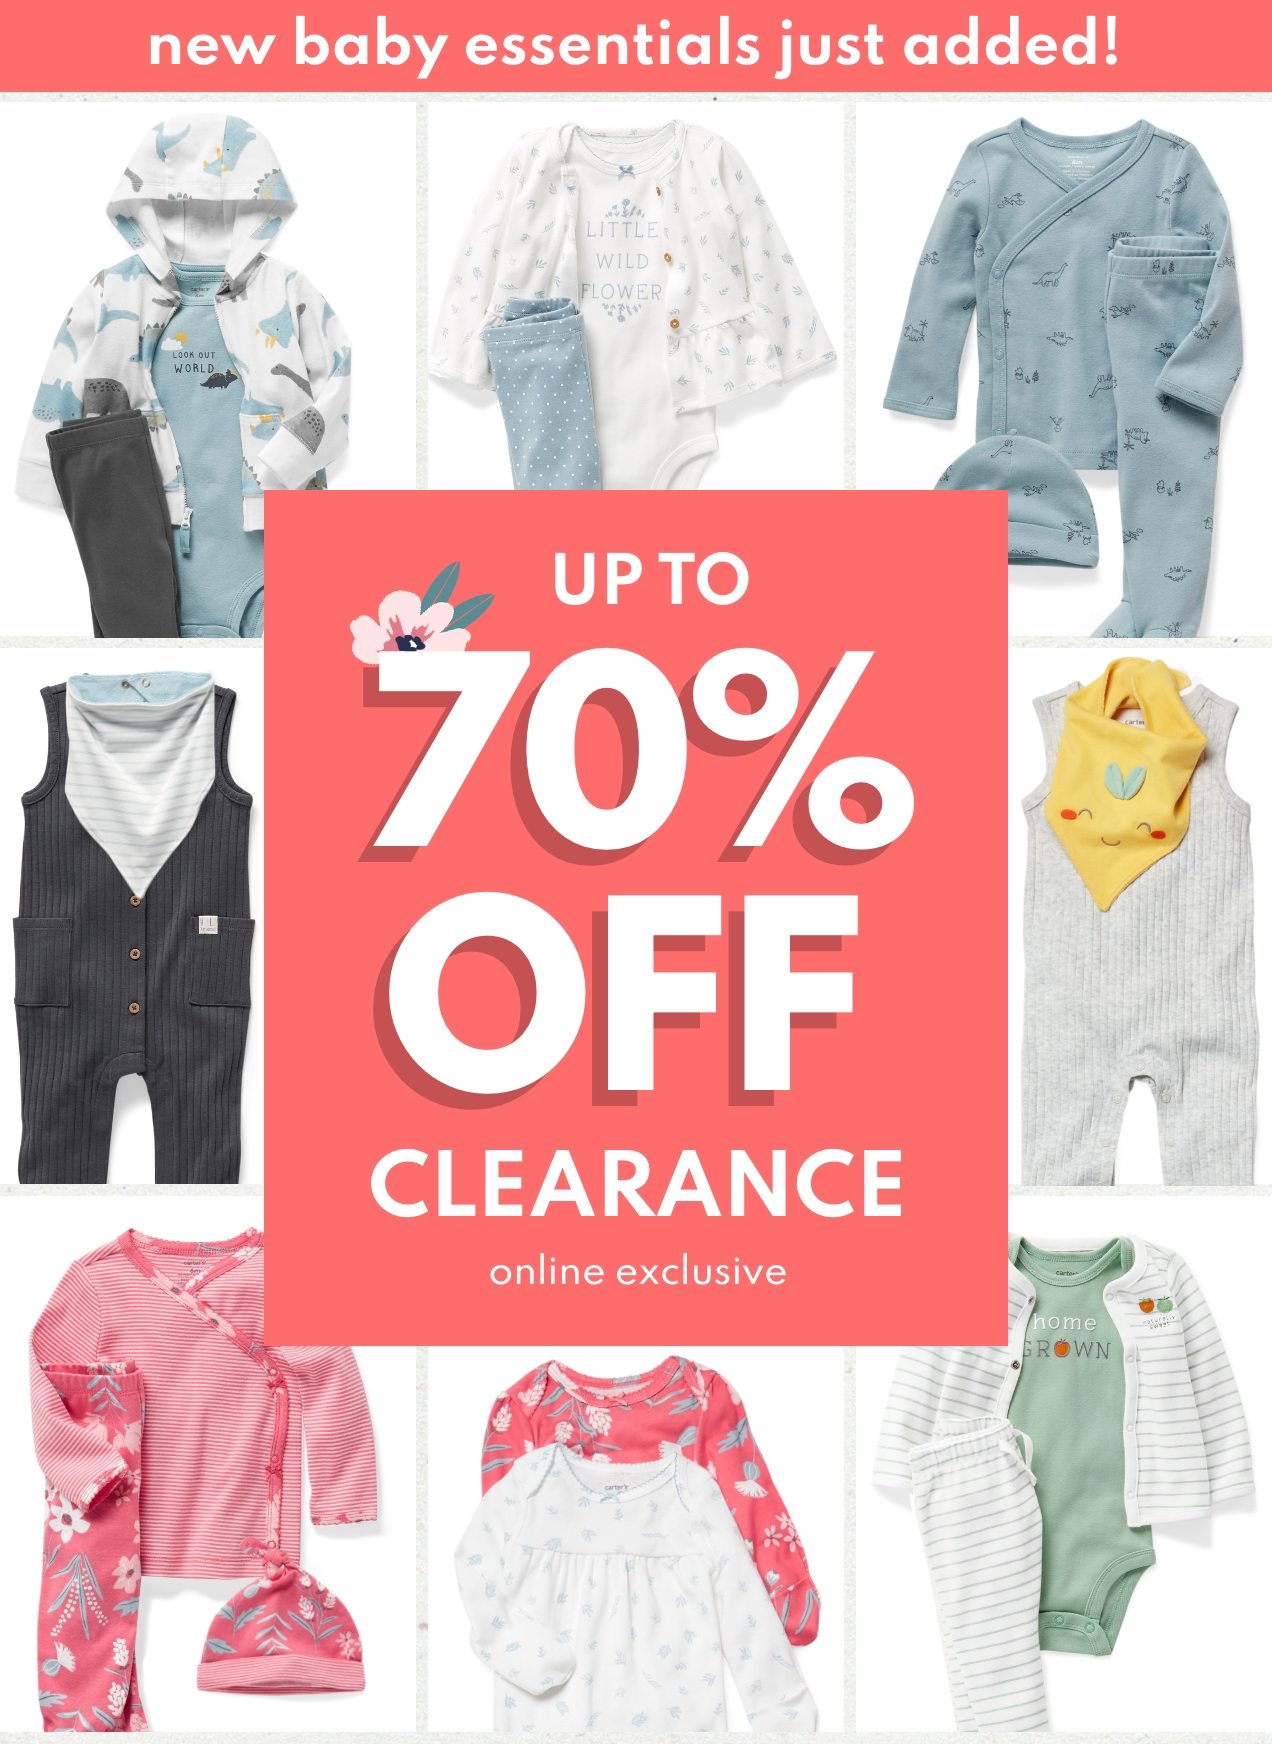 new baby essentials just added! | UP TO 70% OFF CLEARANCE online exclusive 